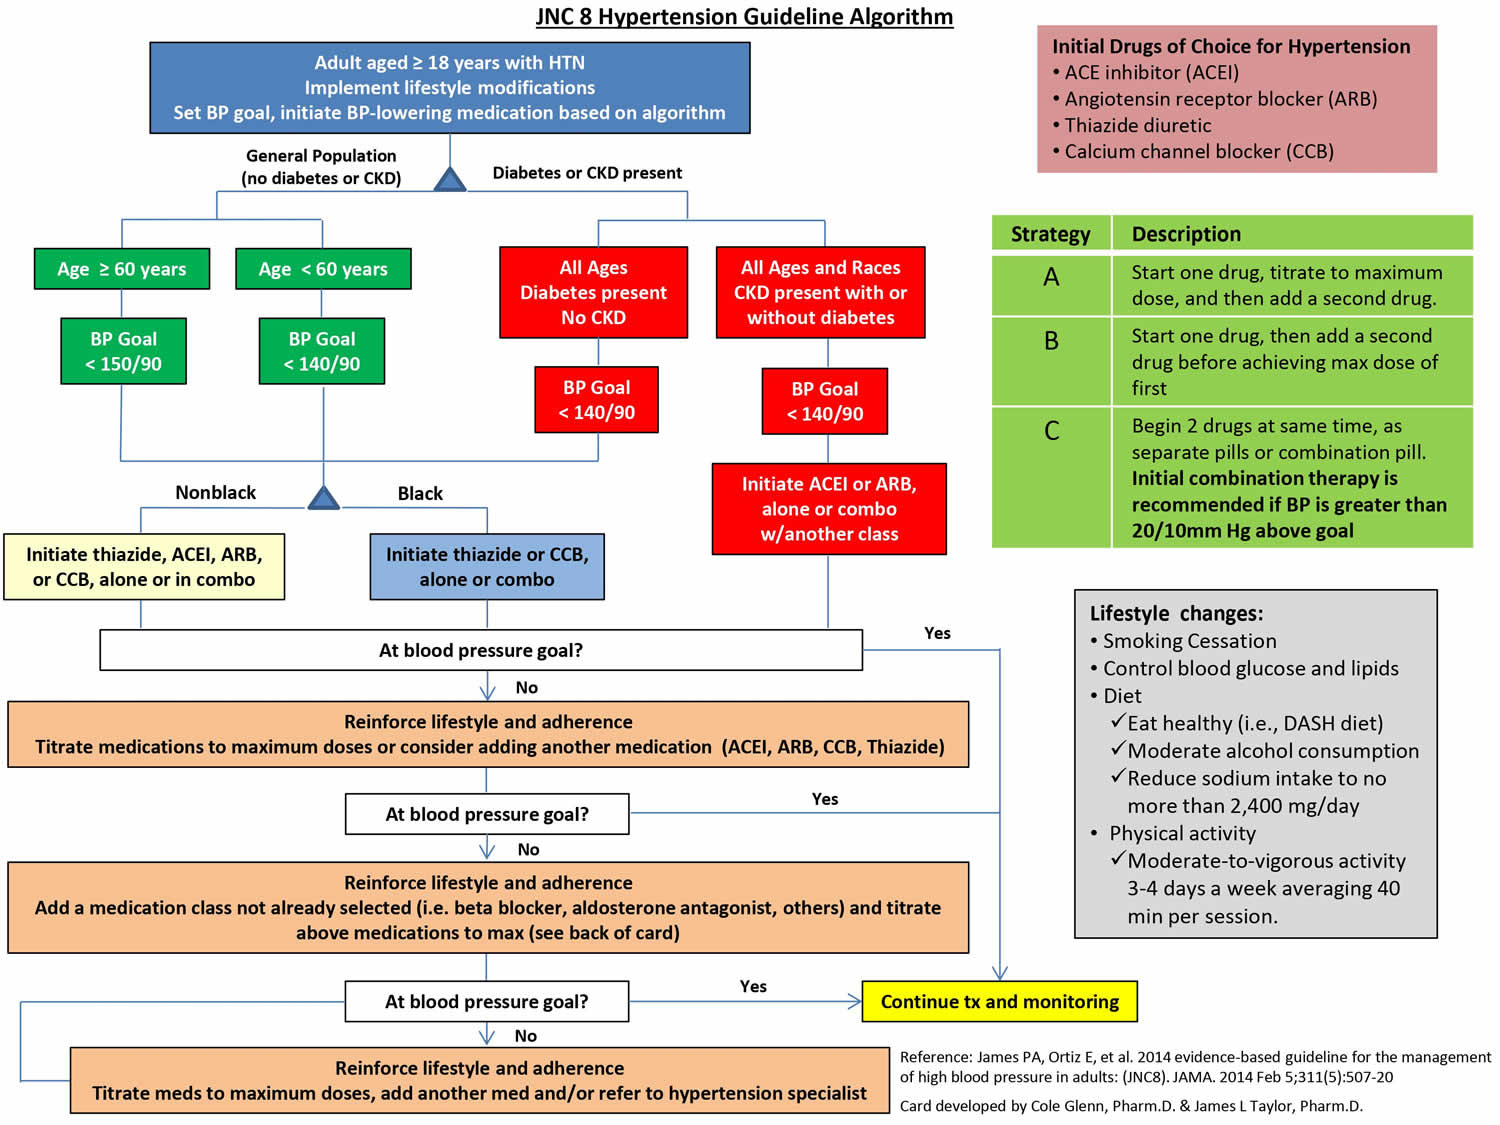 Eighth Joint National Committee Hypertension Guideline Algorithm